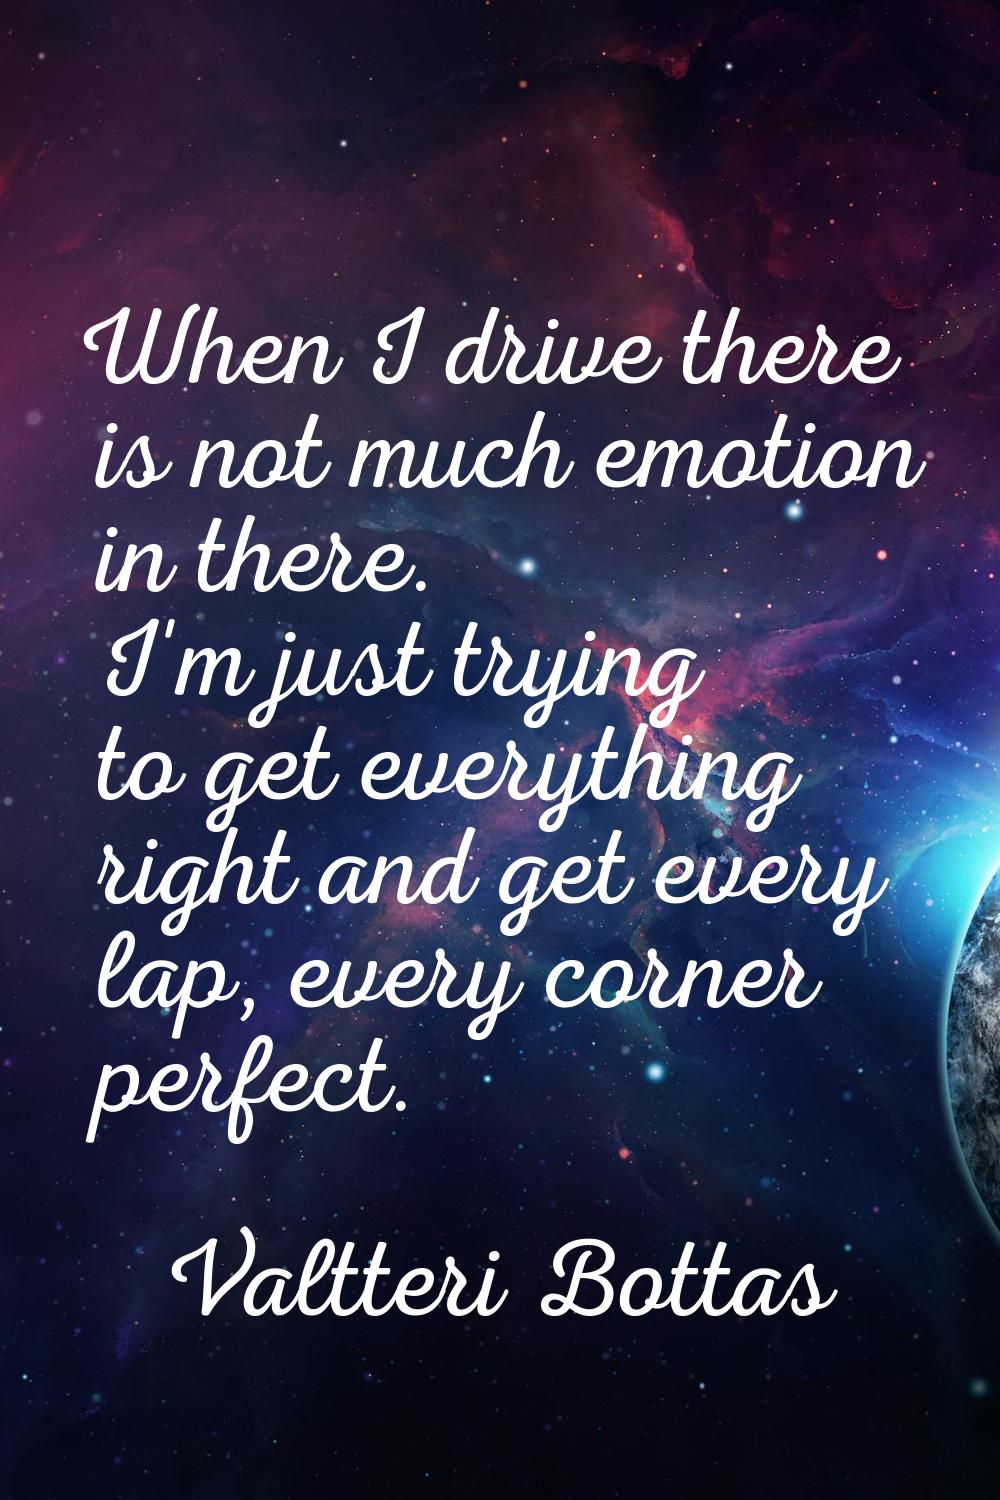 When I drive there is not much emotion in there. I'm just trying to get everything right and get ev